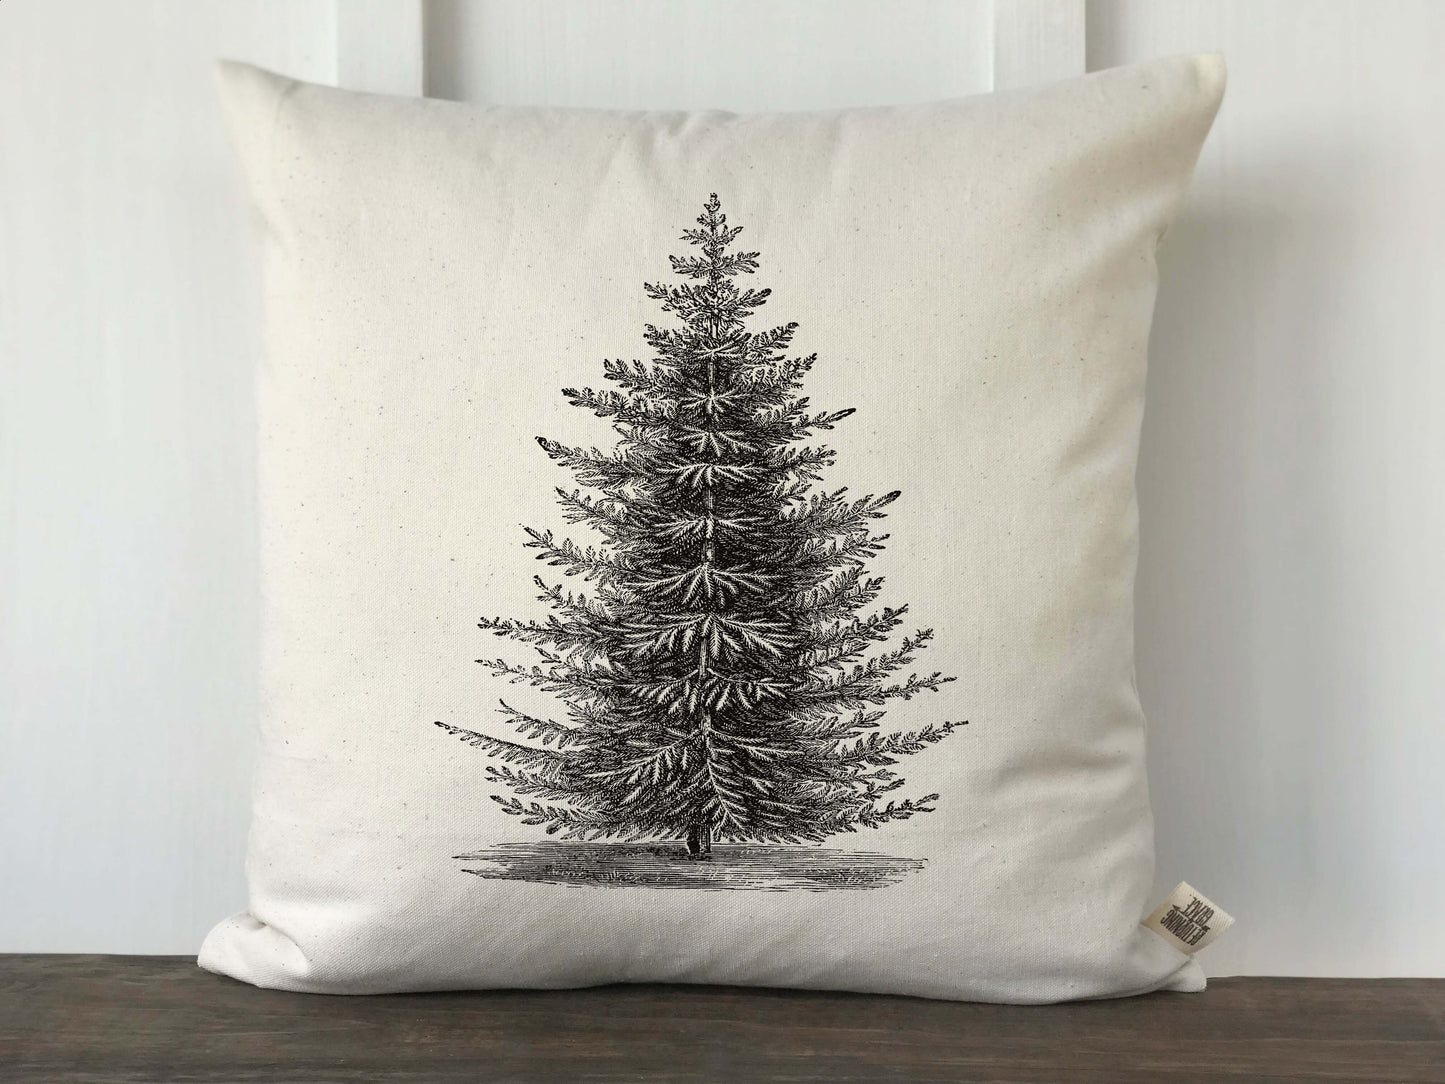 Vintage Christmas Tree Pillow Cover - Returning Grace Designs